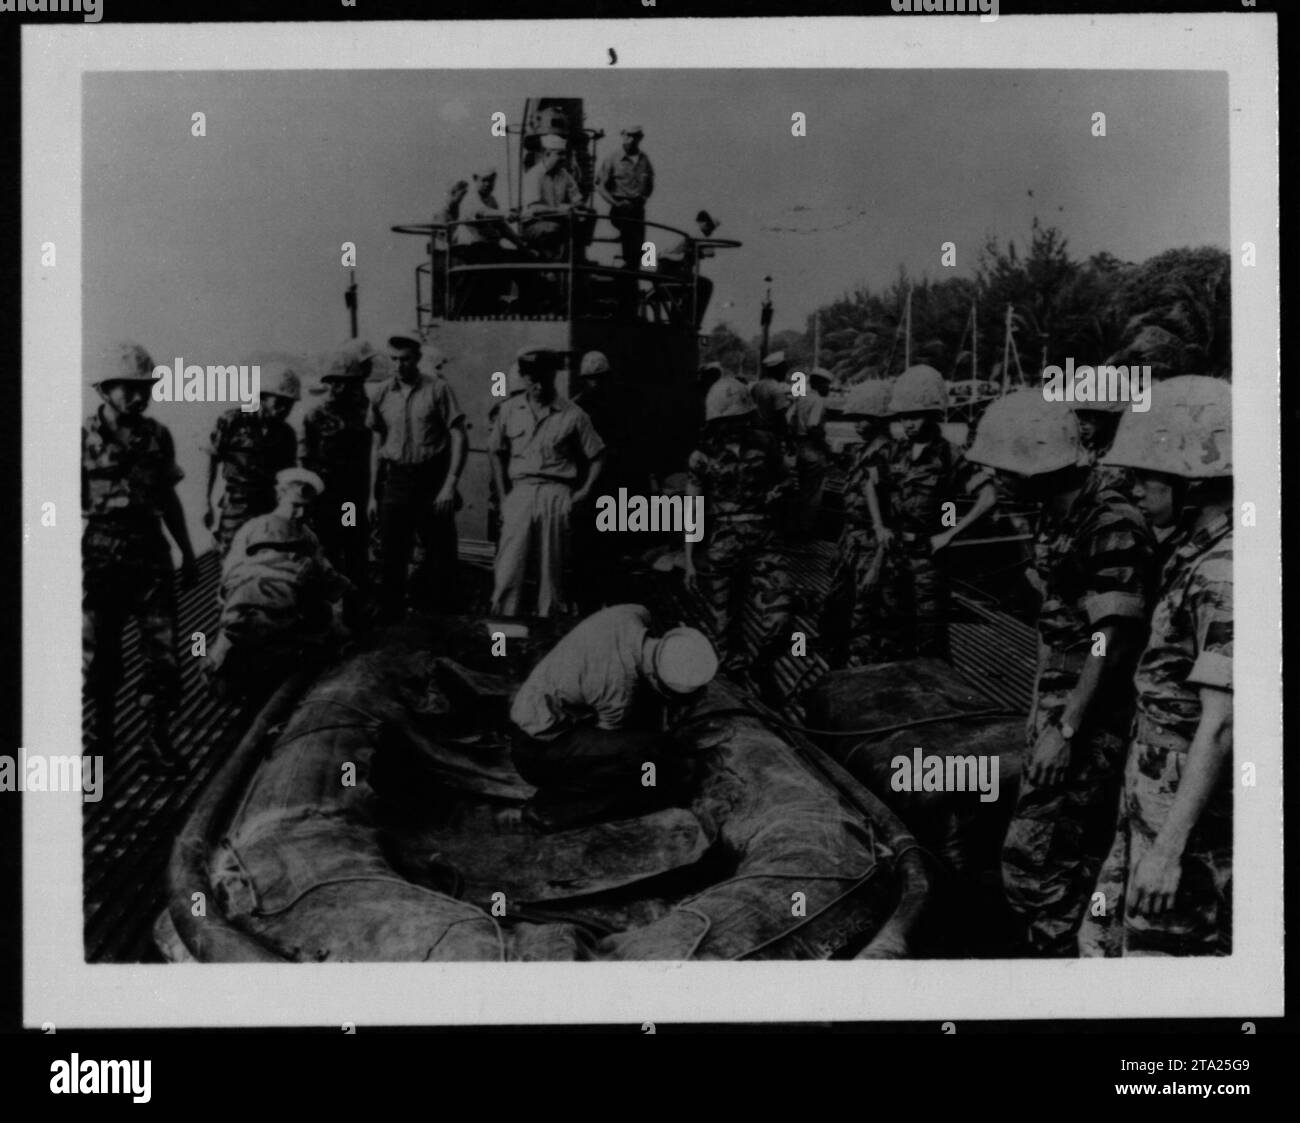 ARVN soldiers, including Vietnamese Marines, participate in military operations conducted in 1962 during the Vietnam War. This photo captures the presence and activities of the Army of the Republic of Vietnam alongside American forces. Stock Photo